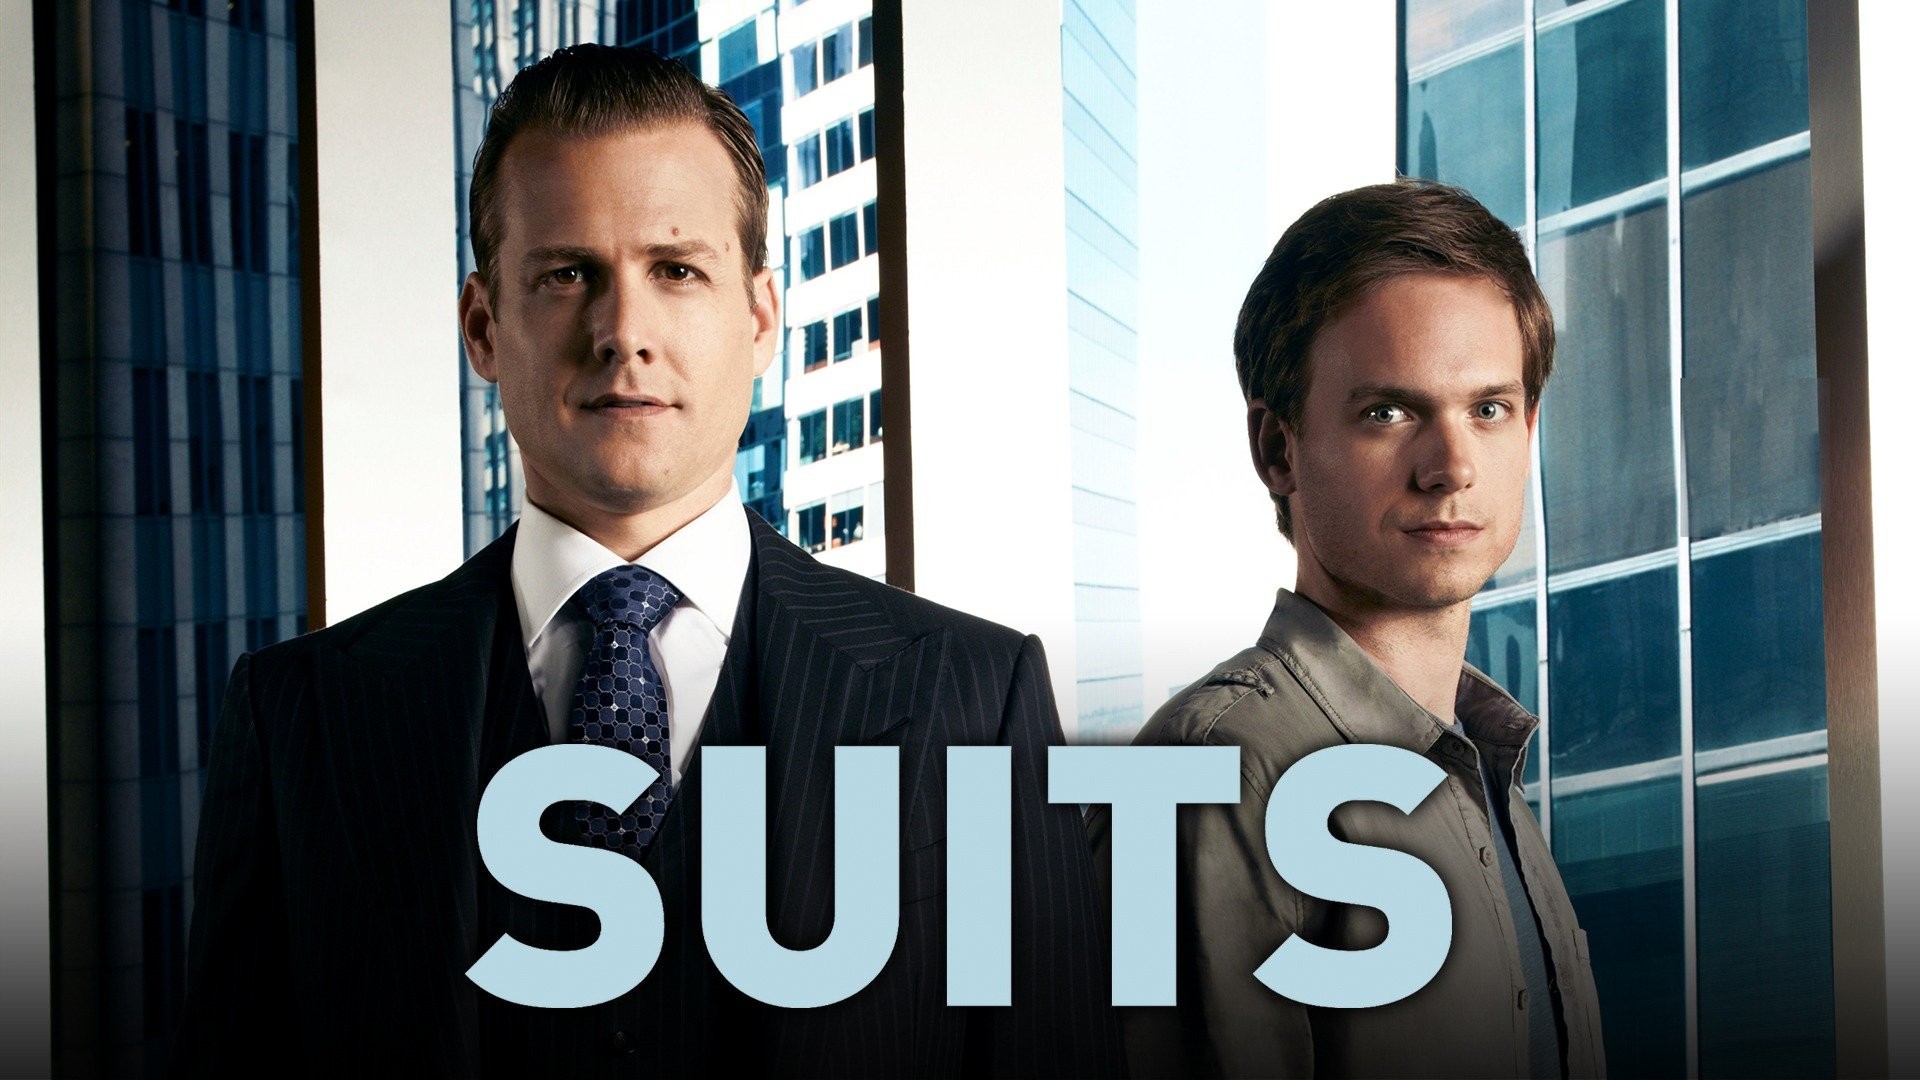 How to Watch 'Pearson': The 'Suits' Spinoff Series